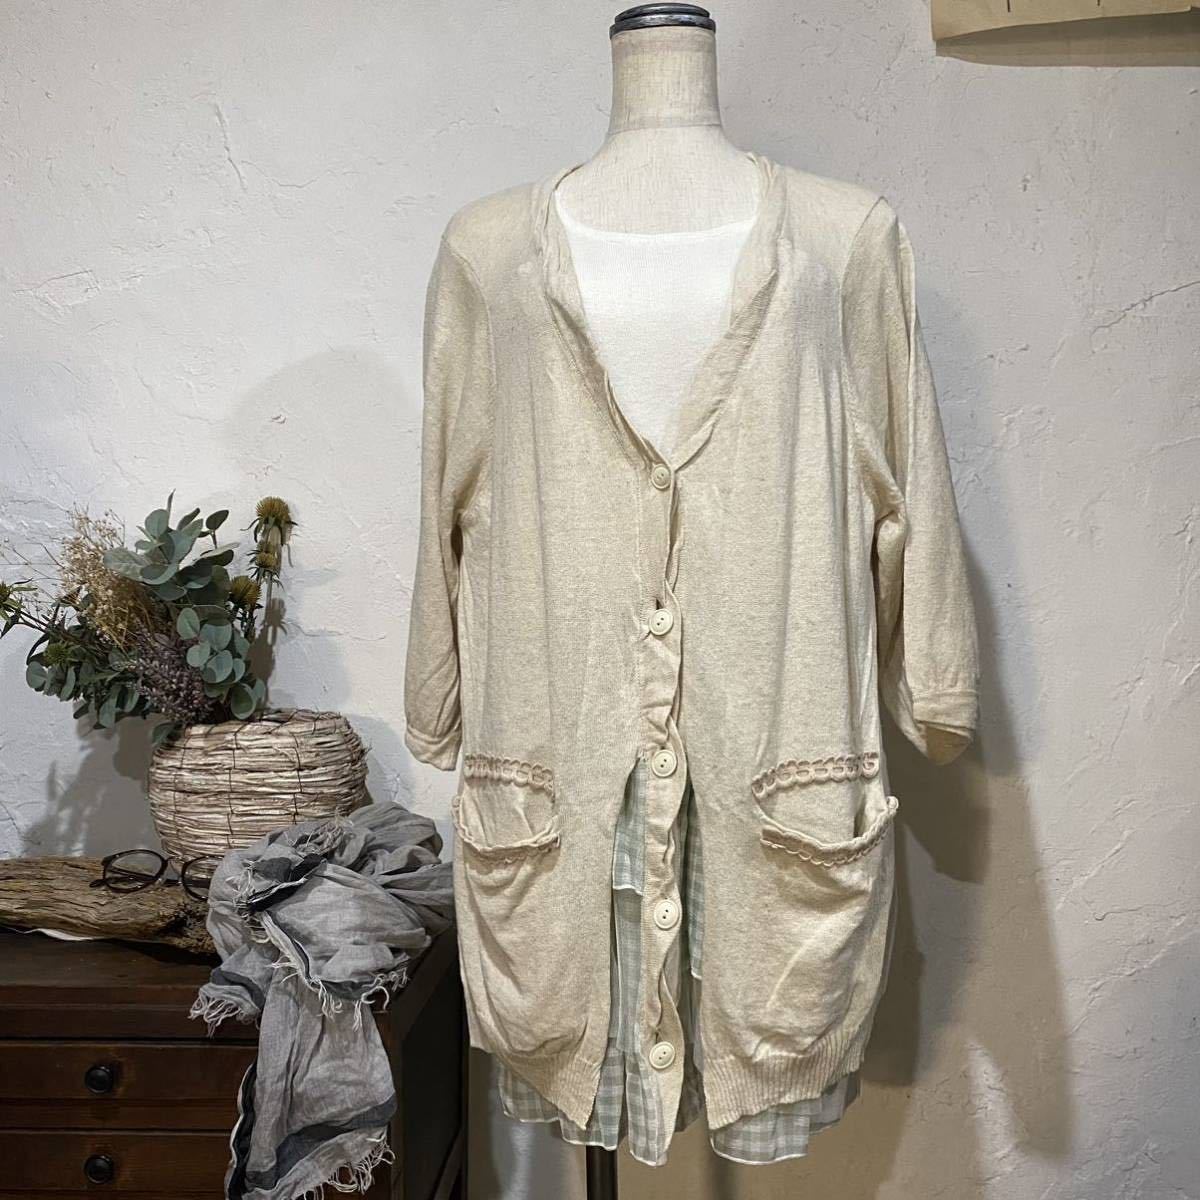 FRAPBOIS * design long cardigan * size:1/ Frapbois / knitted coat / long knitted cardigan / feather weave / summer knitted 